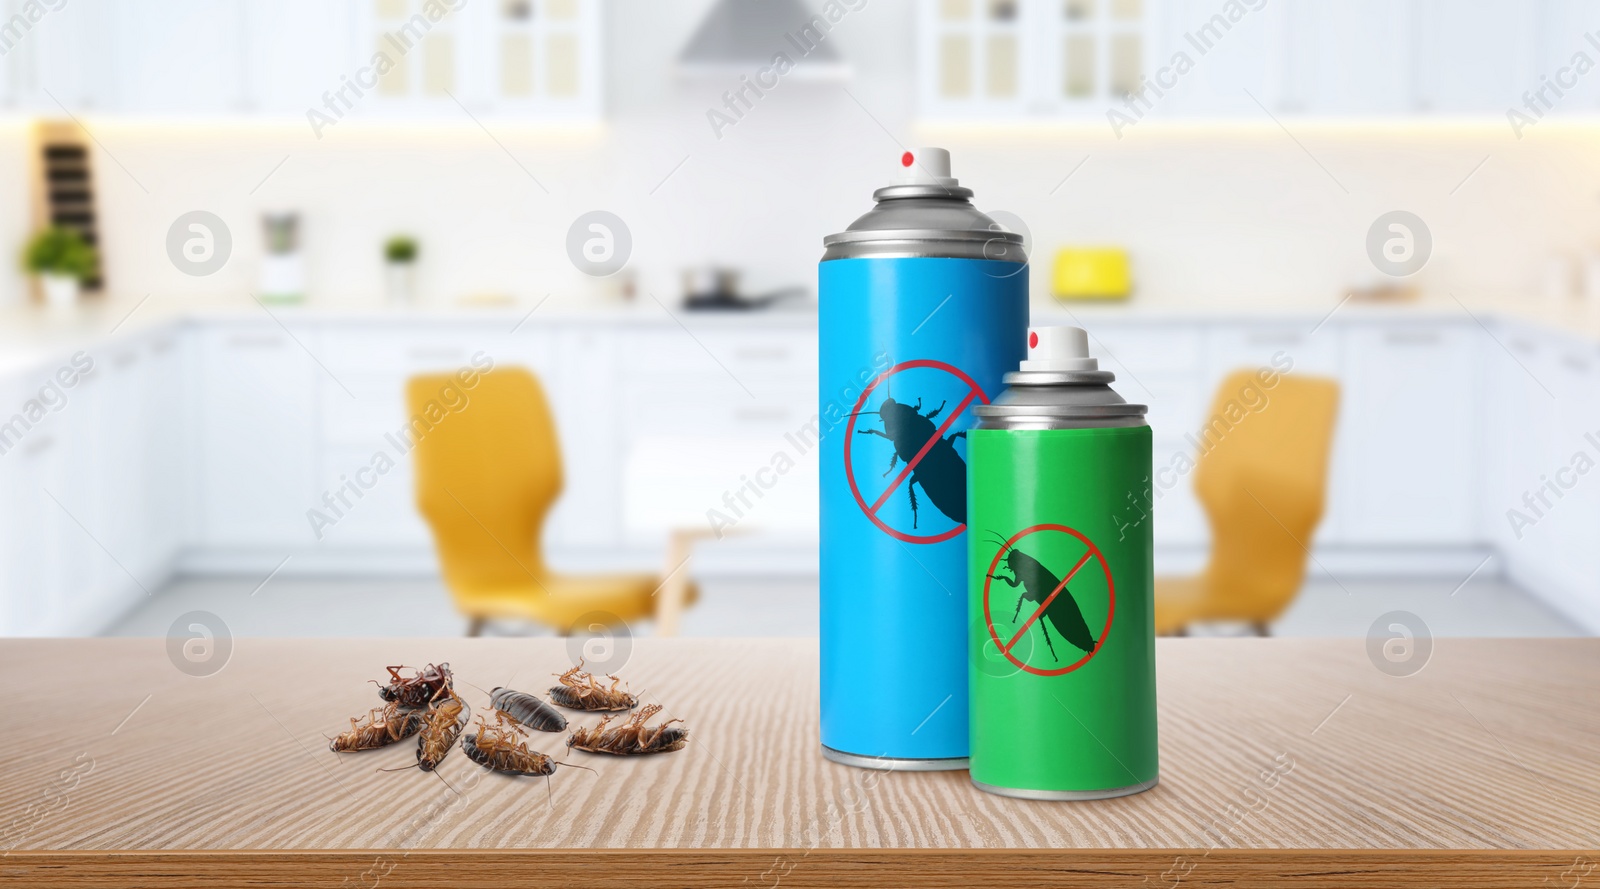 Image of Pest control. Insecticides and dead cockroaches on table in kitchen